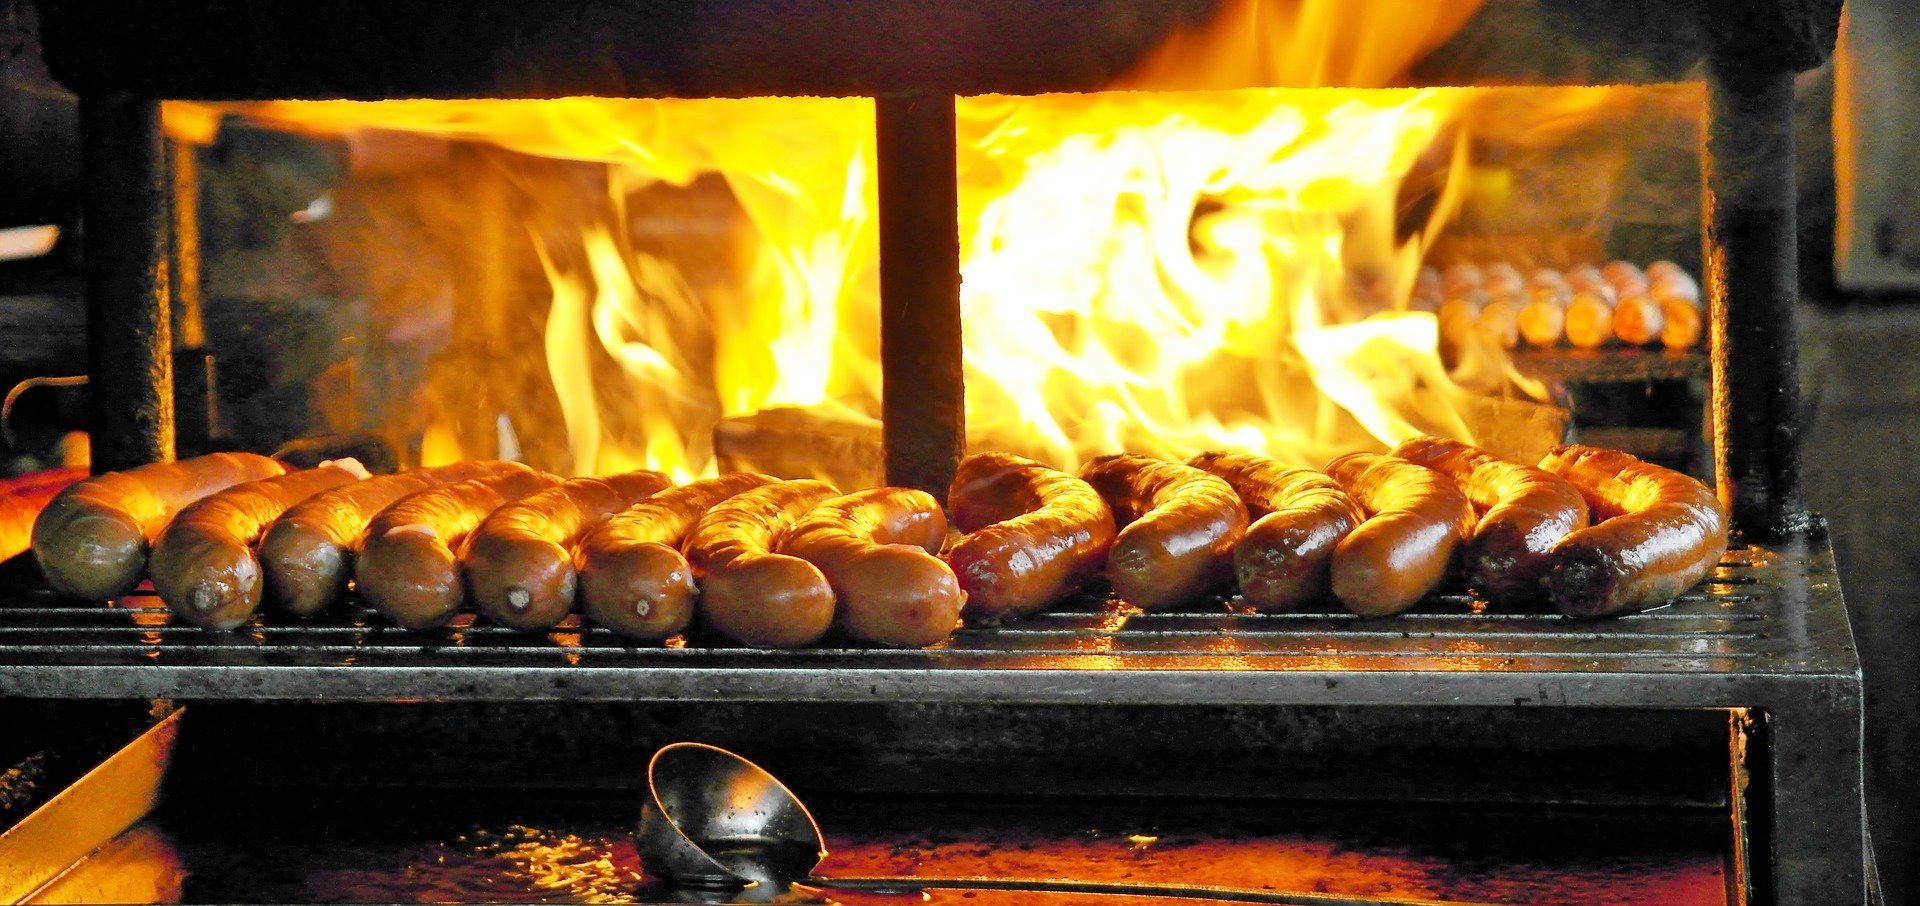 smoked sausage in the barbecue pit, photo courtesy of RitaE from Pixabay